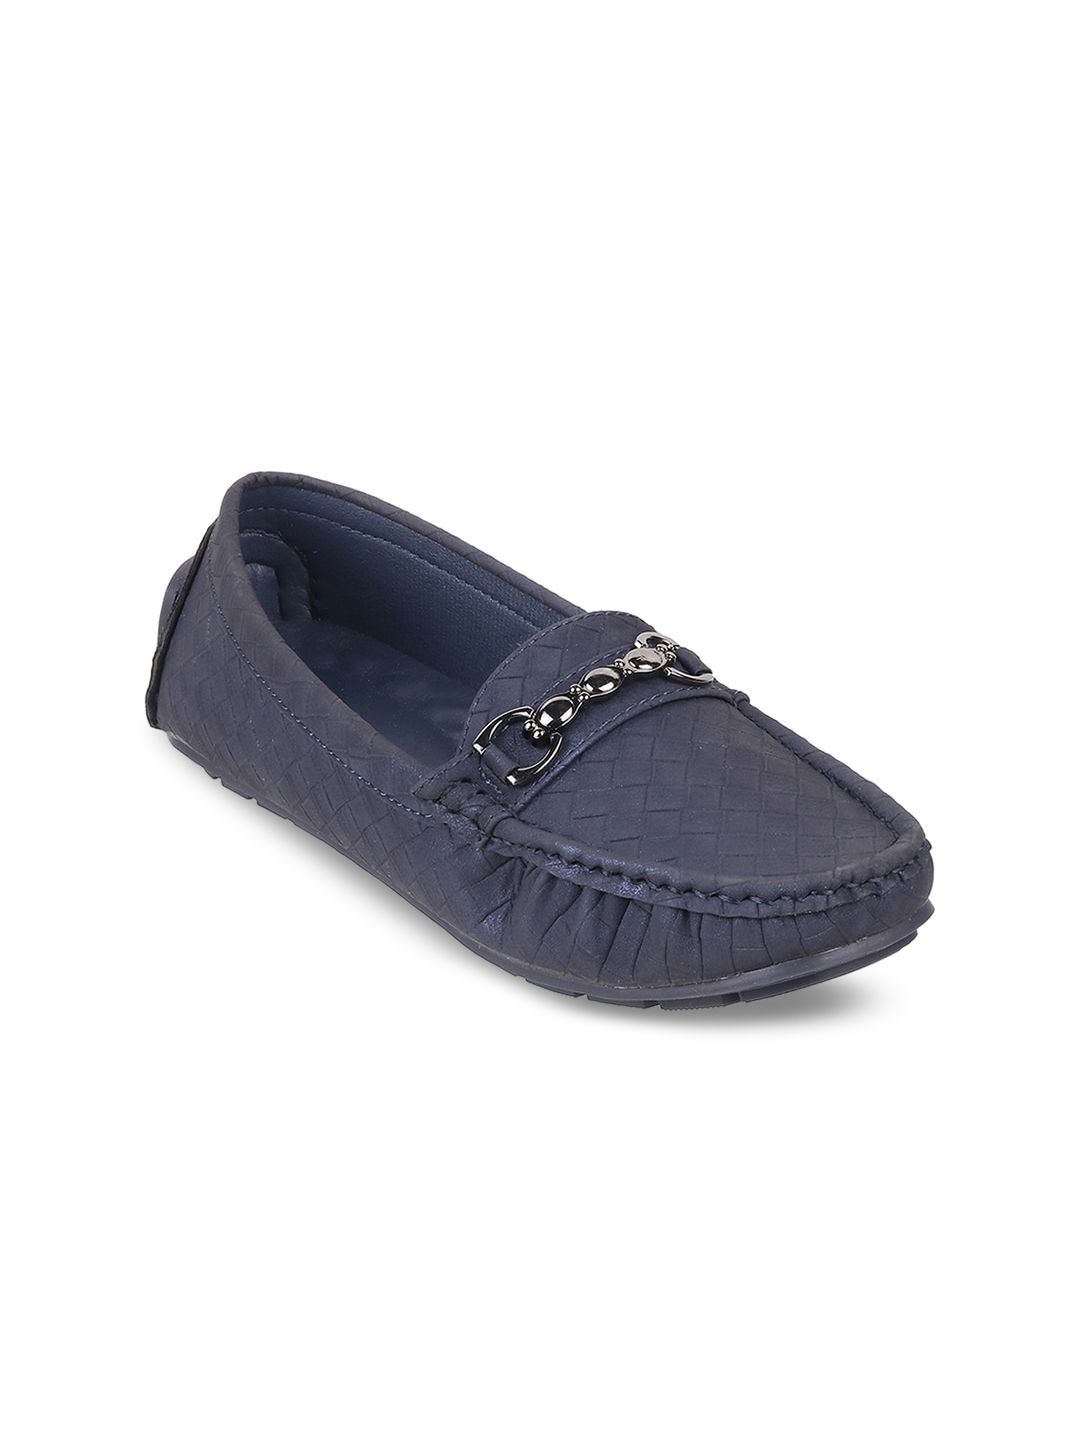 Mochi Women Textured Loafers Price in India